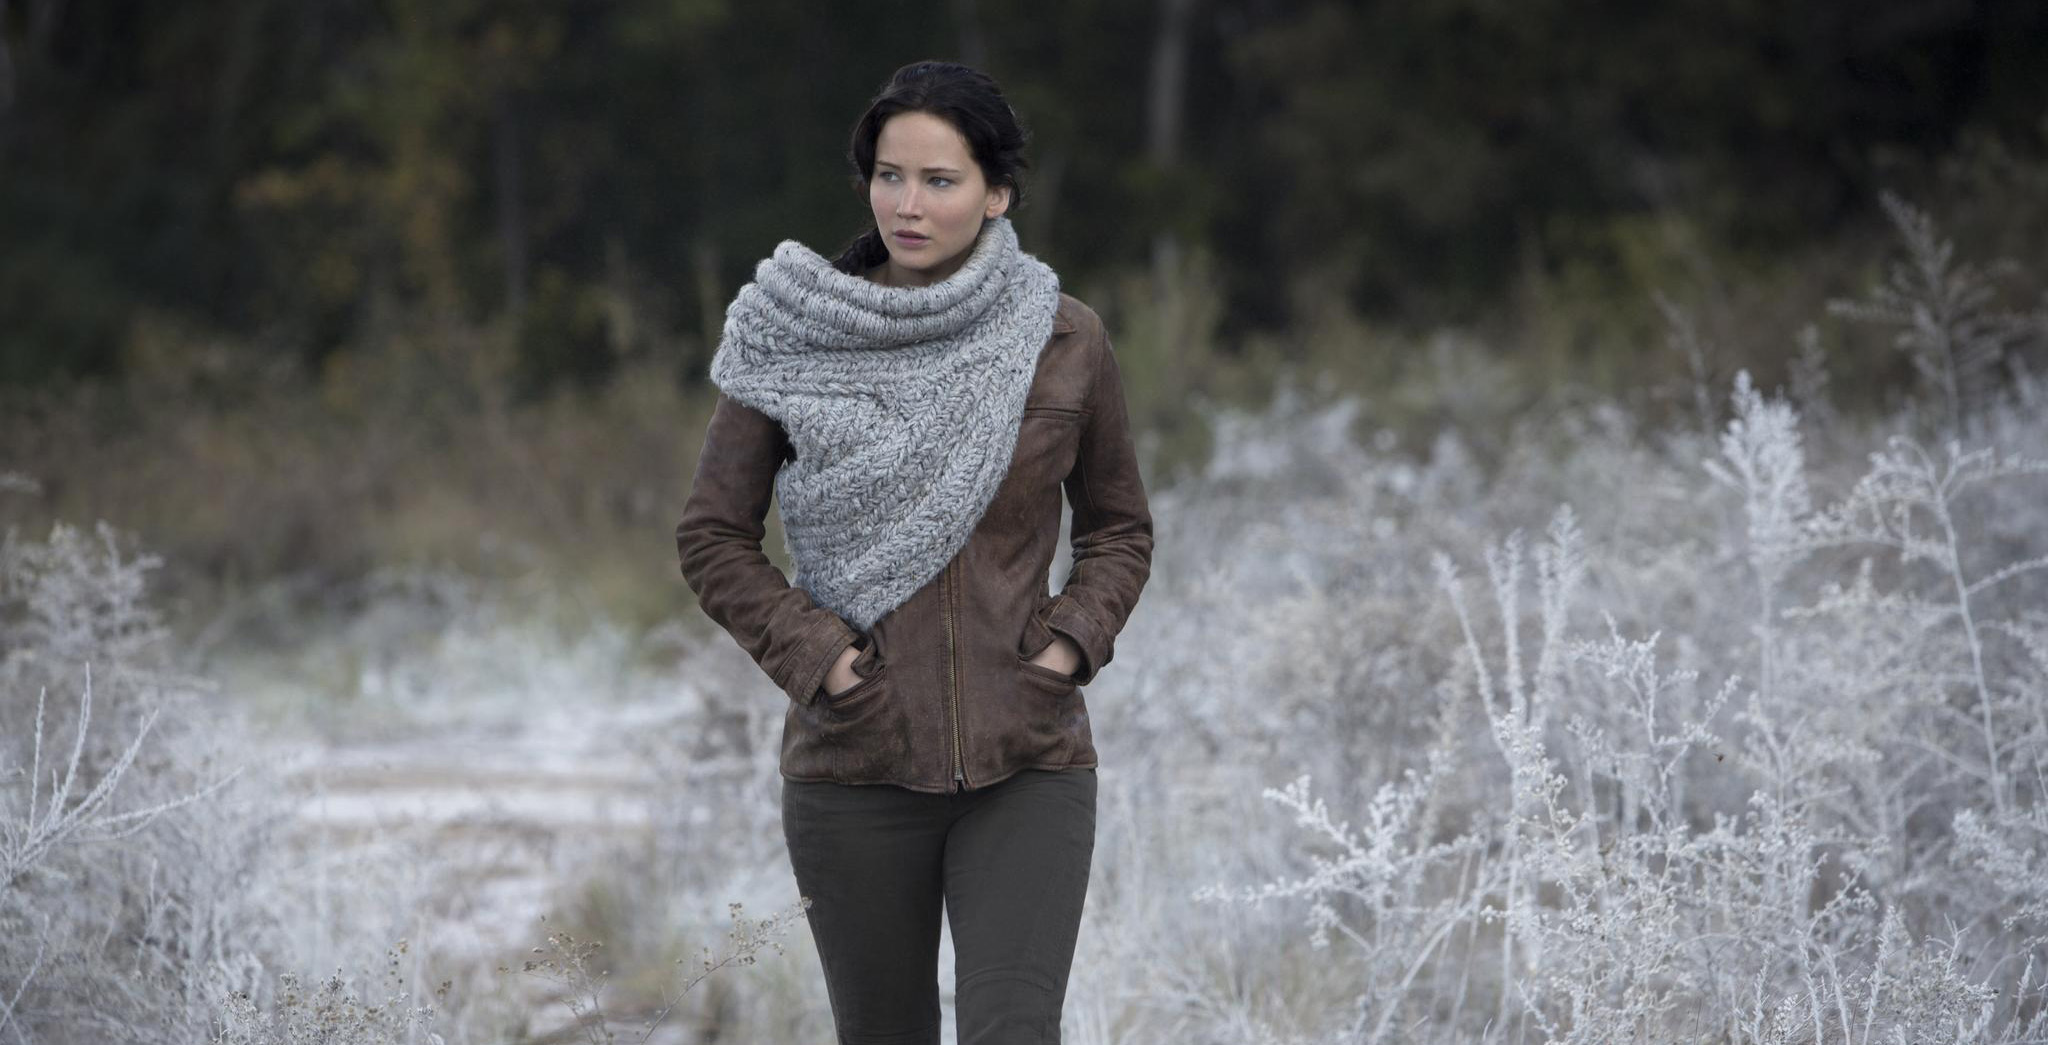 Where to watch the Hunger Games series in Canada before The Ballad of Songbirds & Snakes